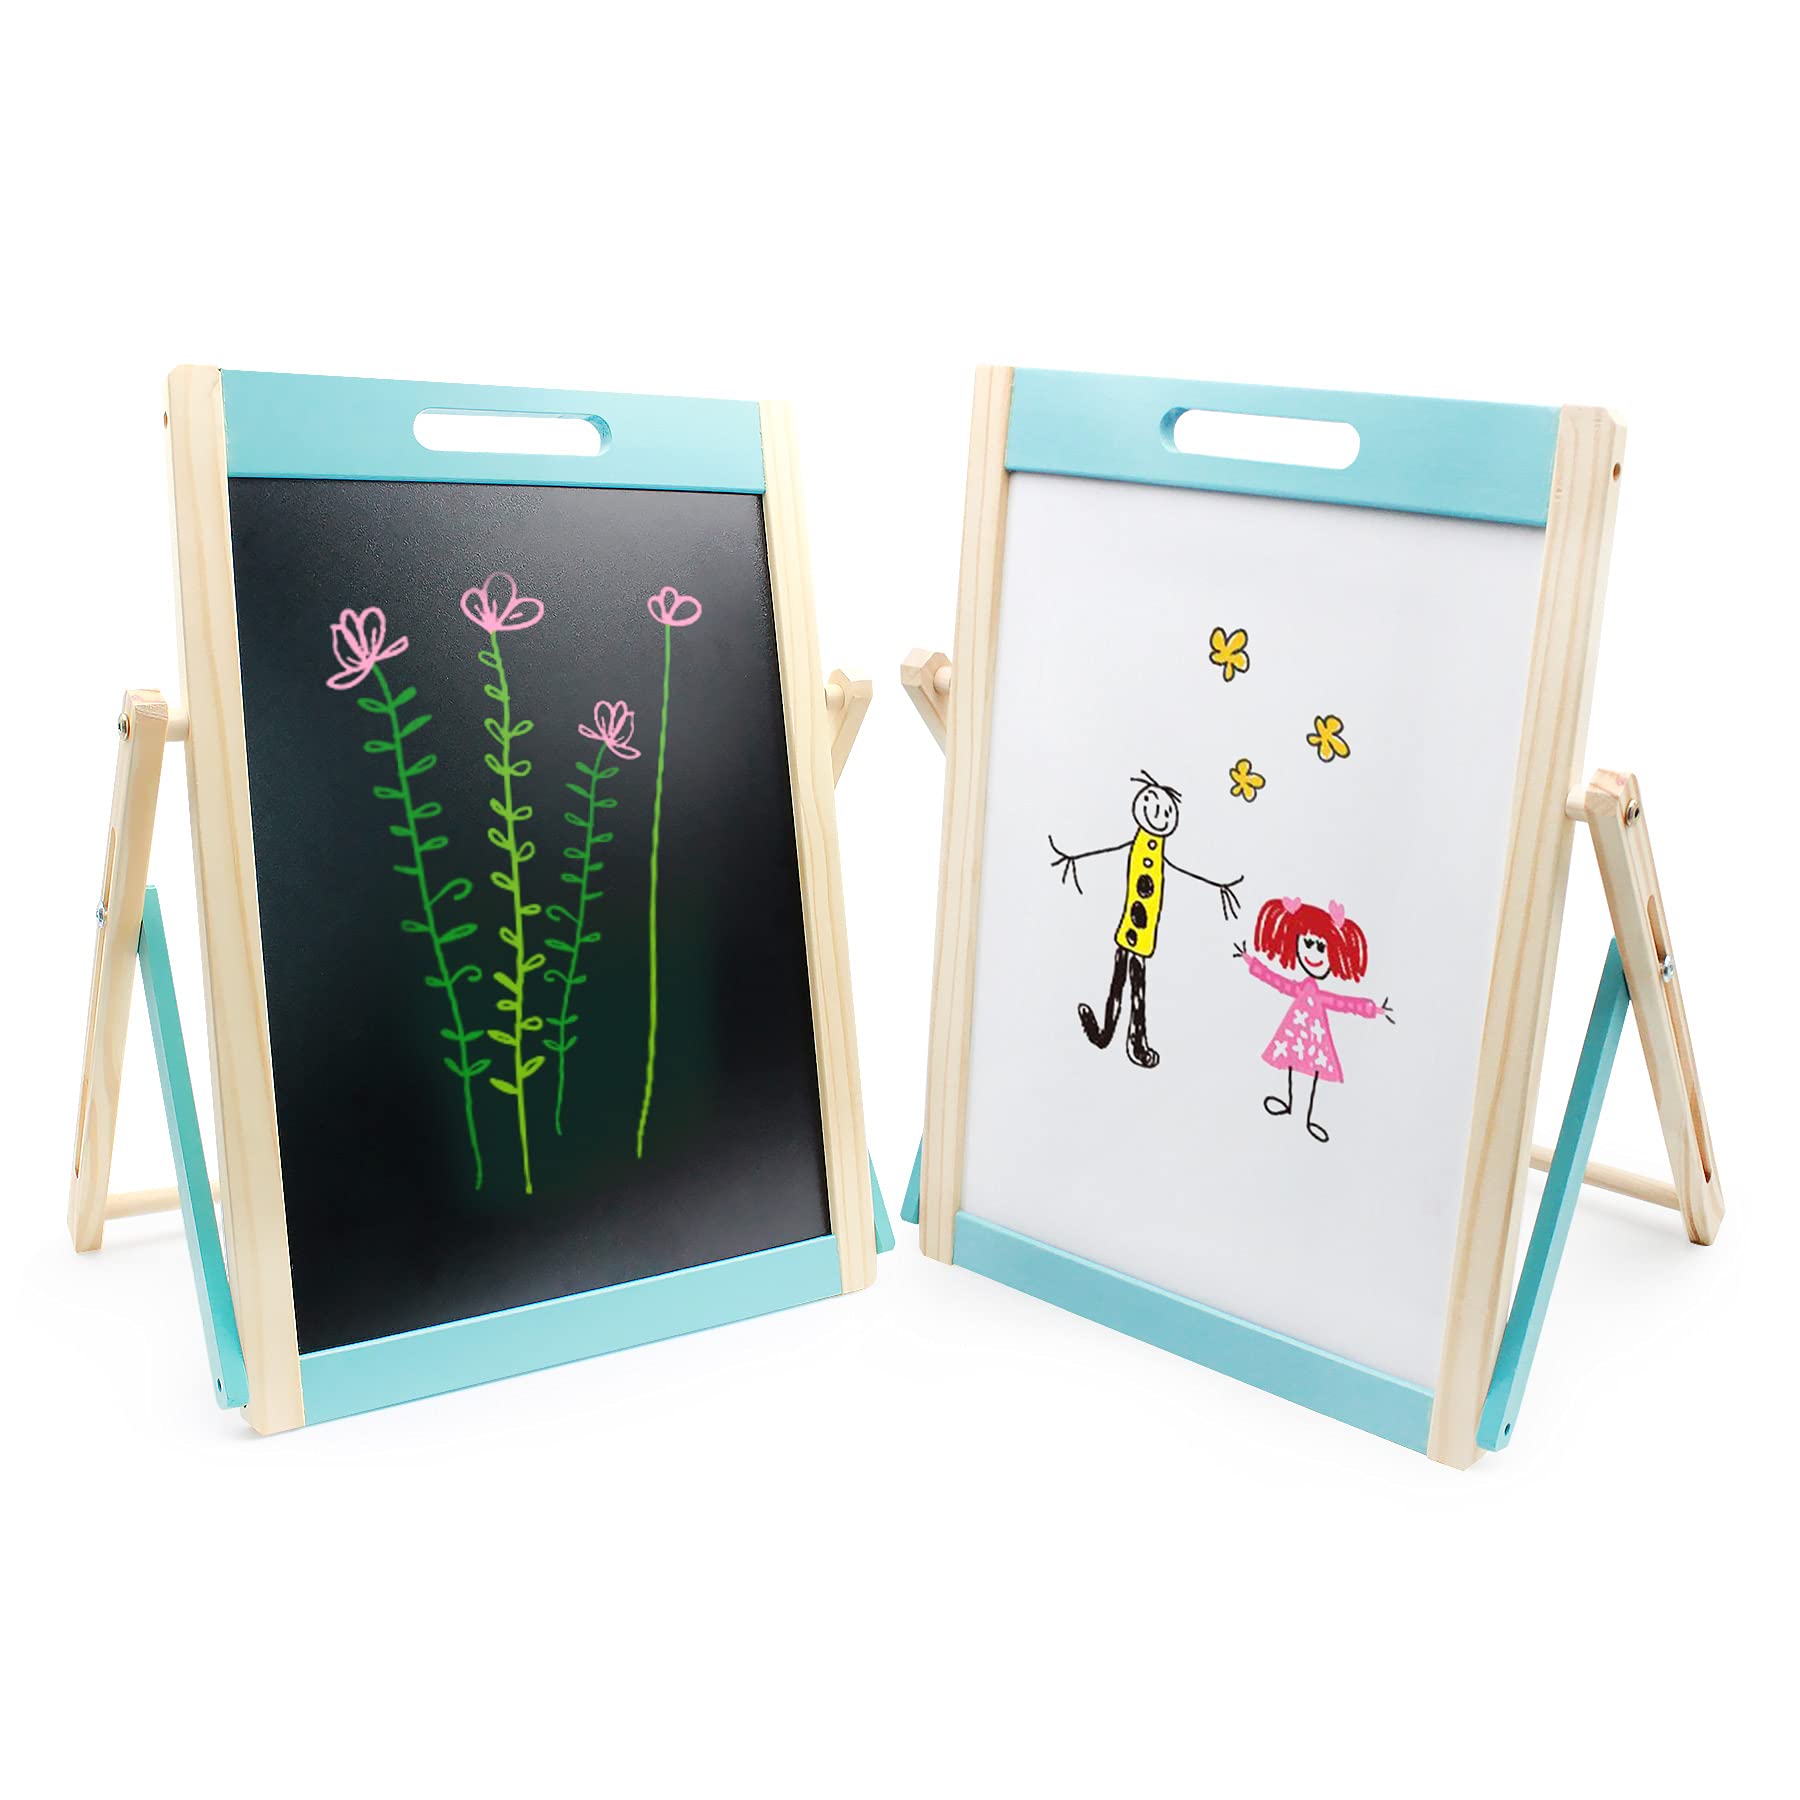 Arkmiido Kids Tabletop Wooden Easel Small，Portable Kids Easel Educationcal Magnetic Chalkboard & Whiteboard Double Sided with Chalk, Markers, Eraser for Kids Toddlers Writing & Drawing 3+ Featured Image